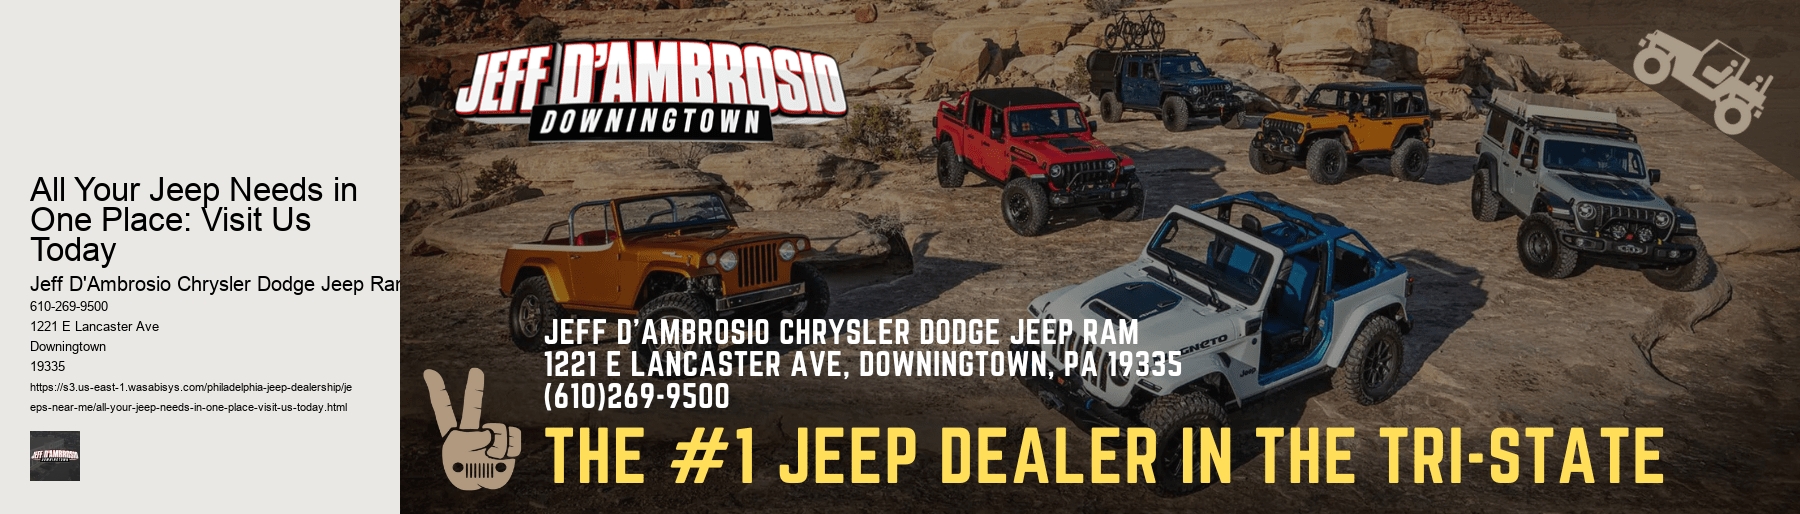 All Your Jeep Needs in One Place: Visit Us Today